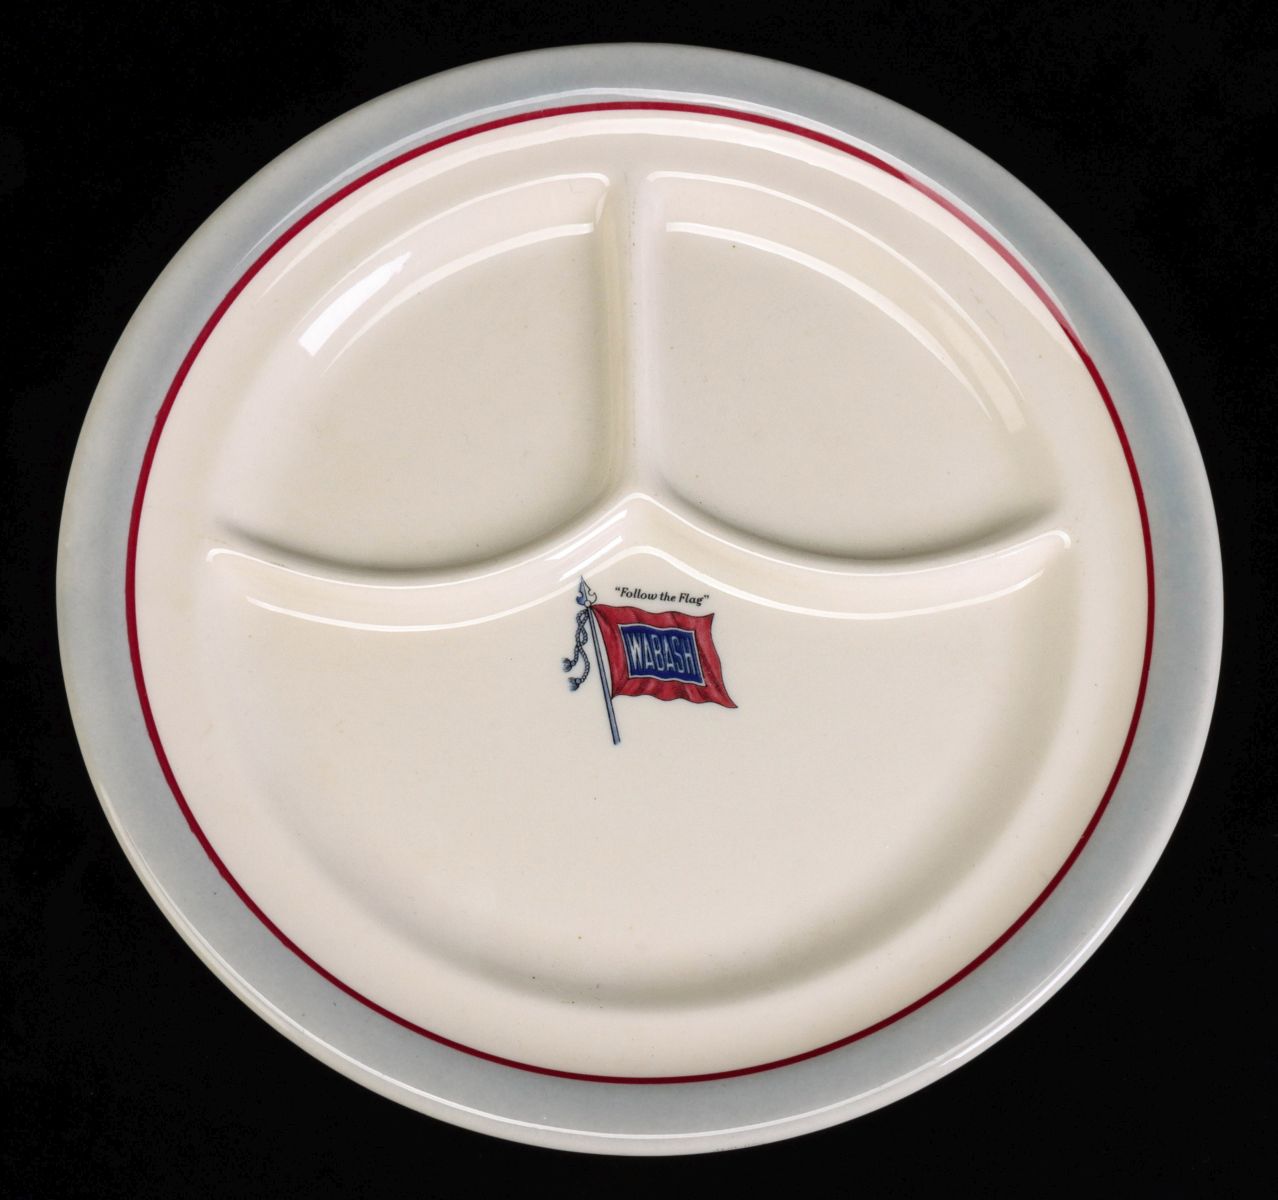 A WABASH RAILROAD 'BANNER' PATTERN GRILL PLATE